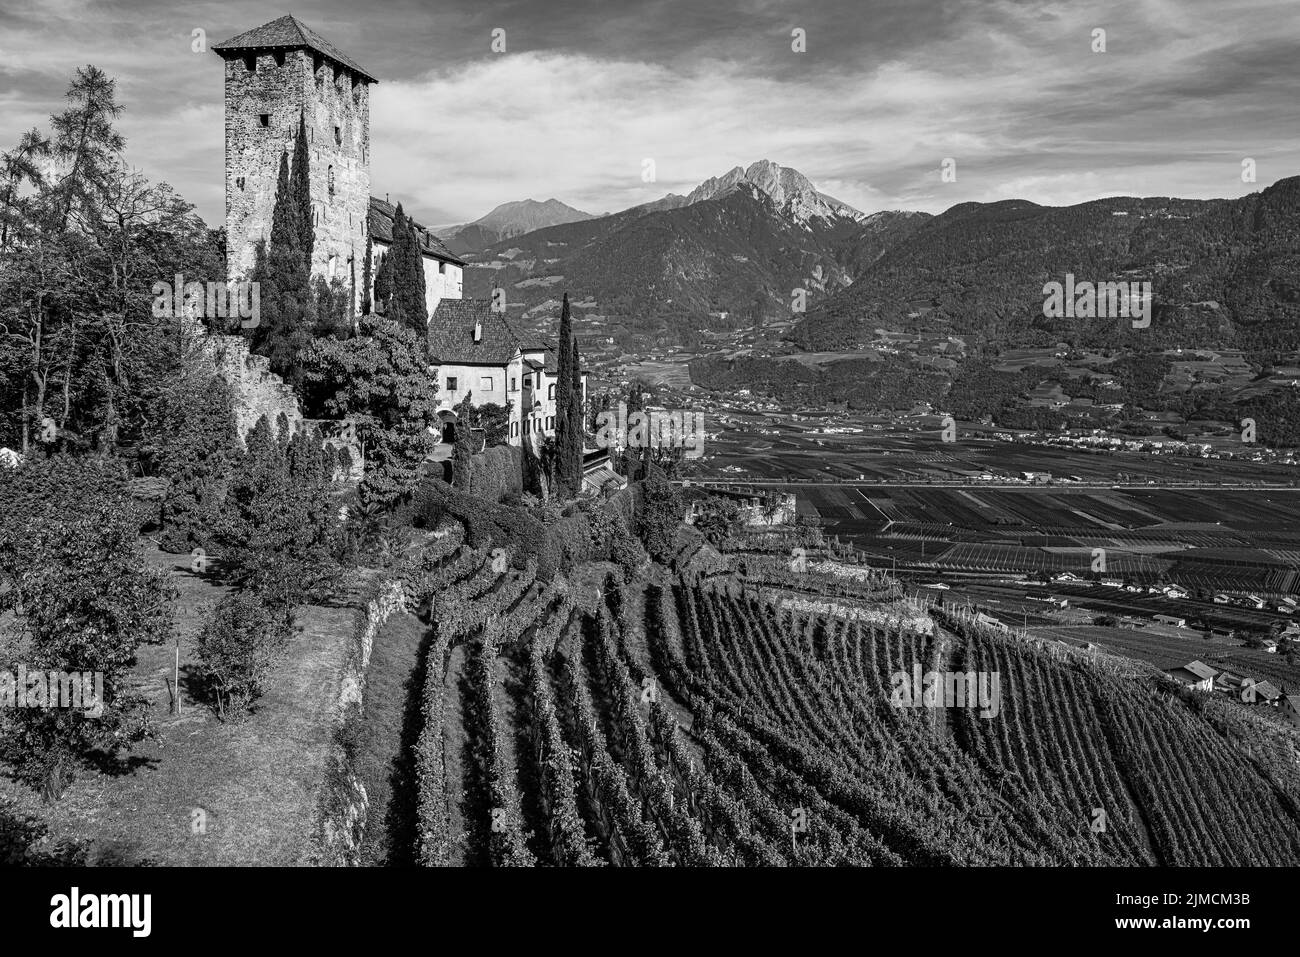 Lebenberg Castle above vineyards, near Tscherms, black and white photograph, in the background the spa town of Meran, South Tyrol, Italy Stock Photo